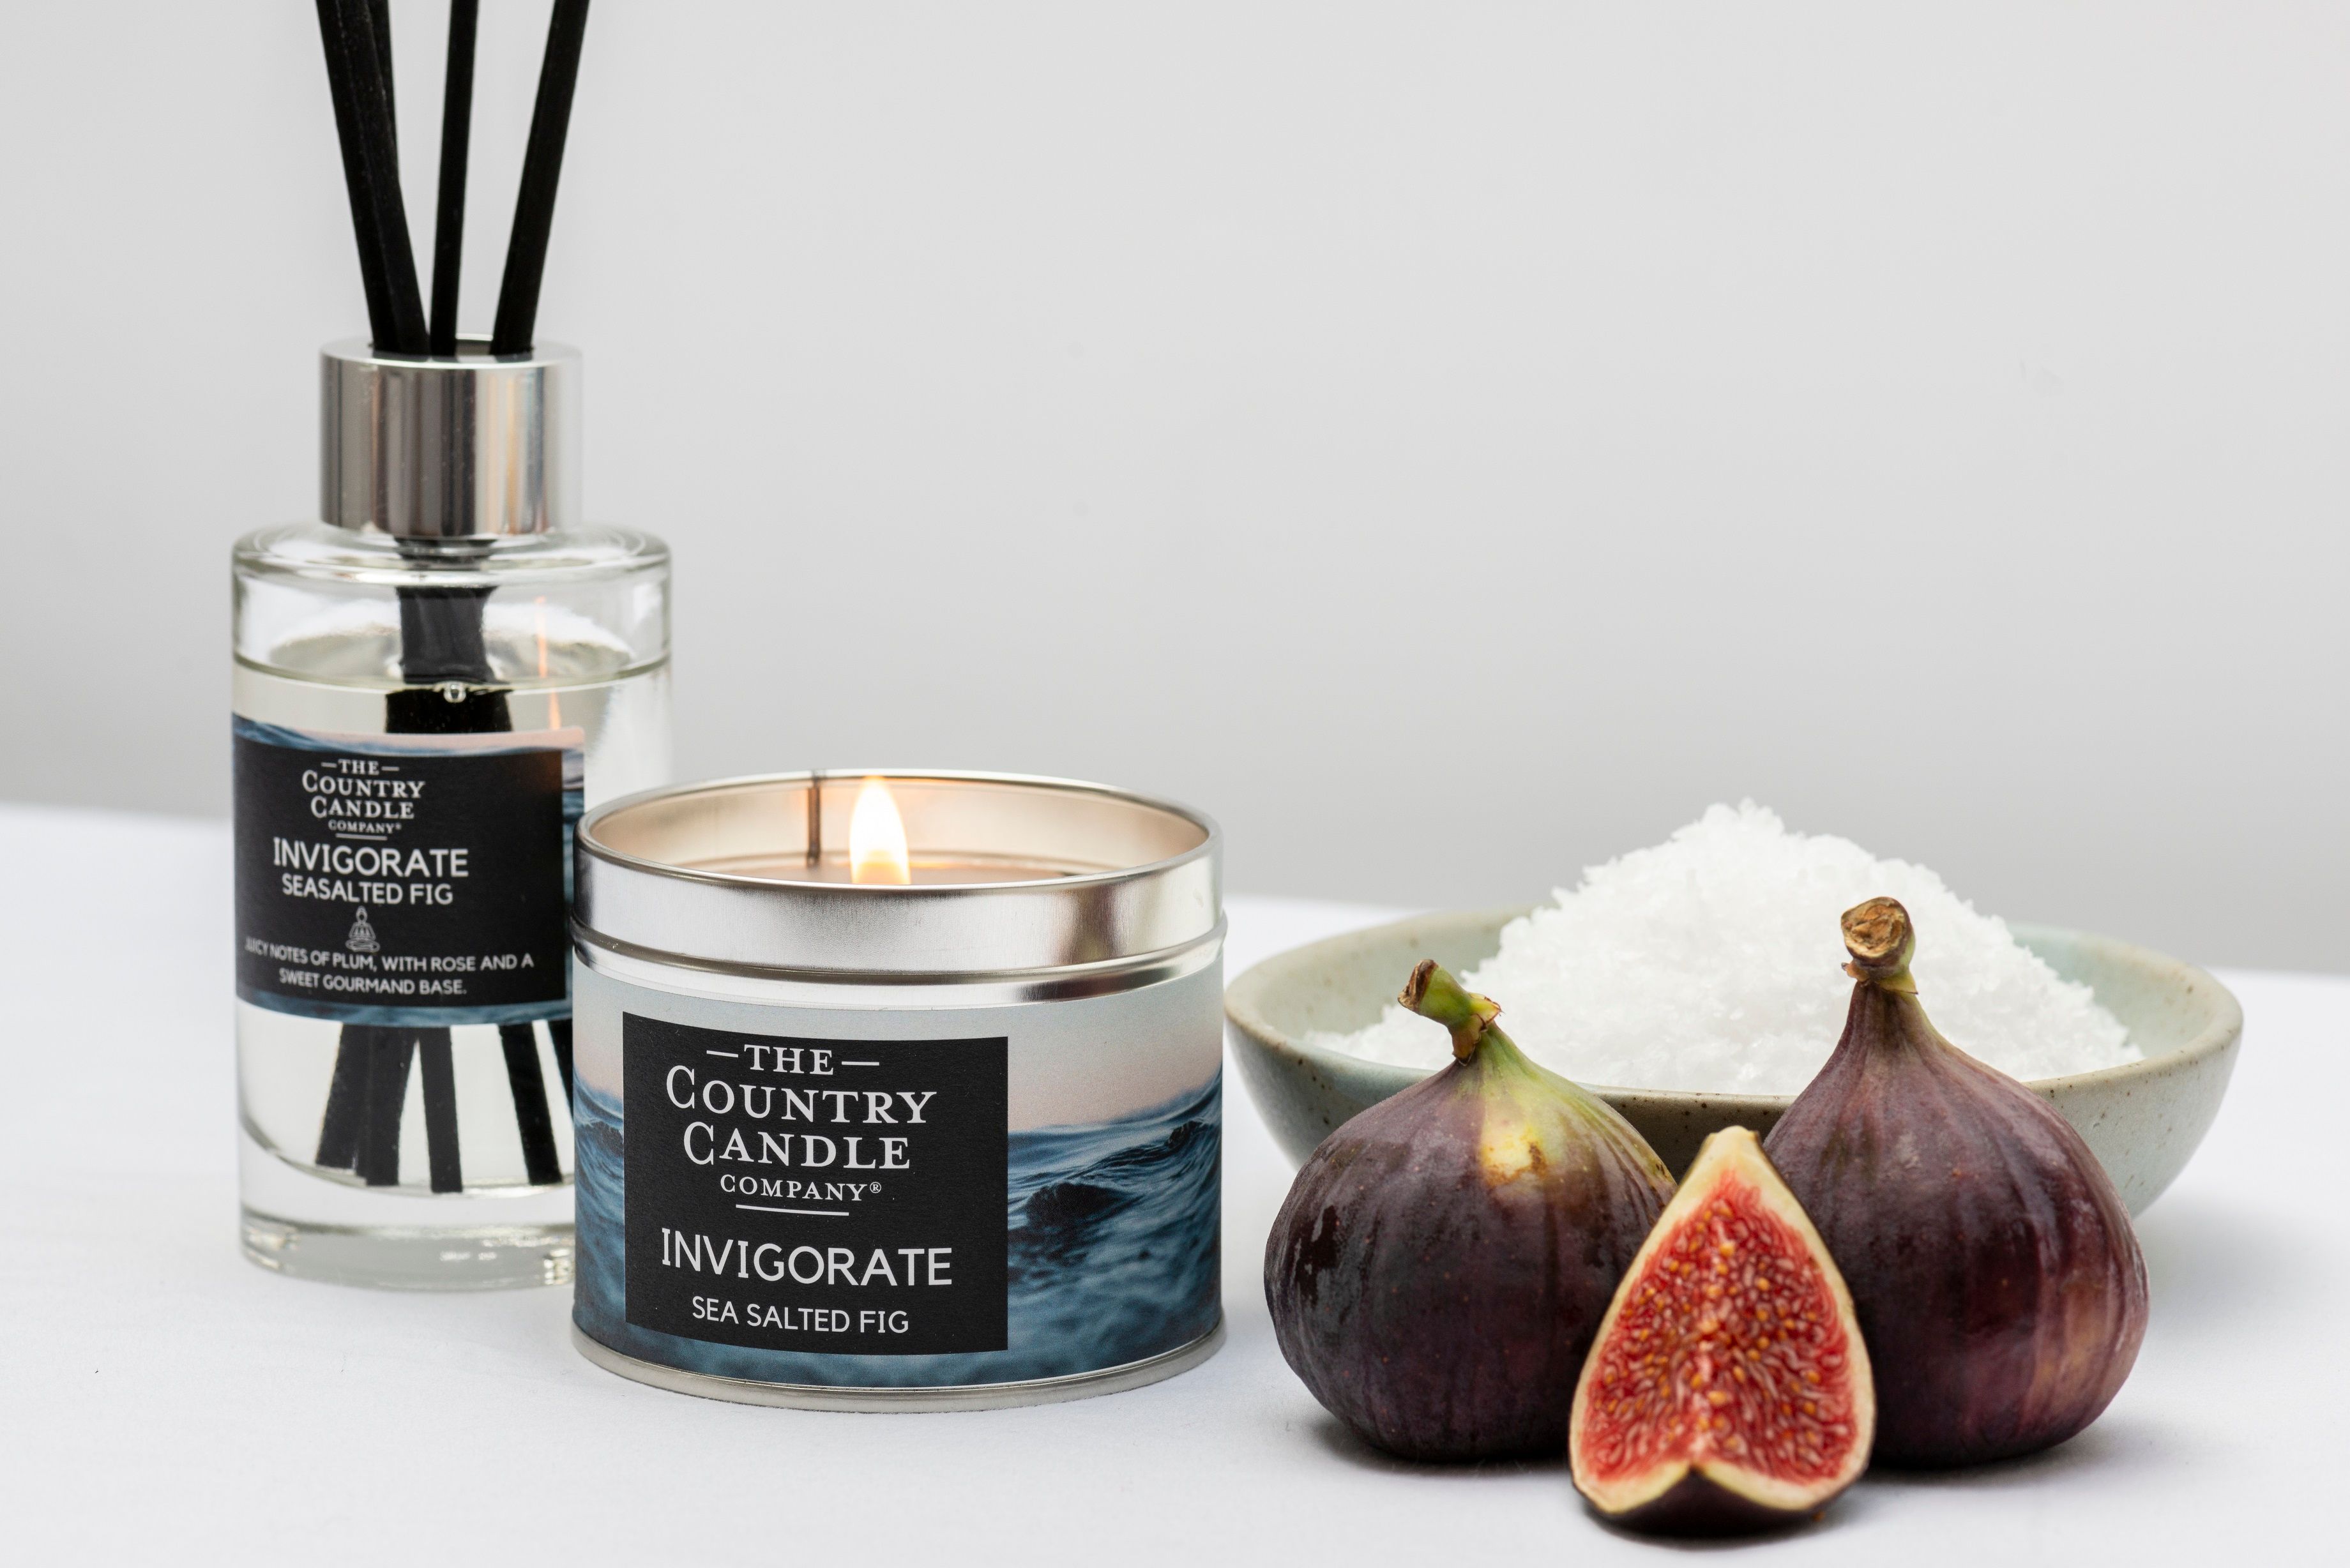 Show Offers -The Country Candle Company